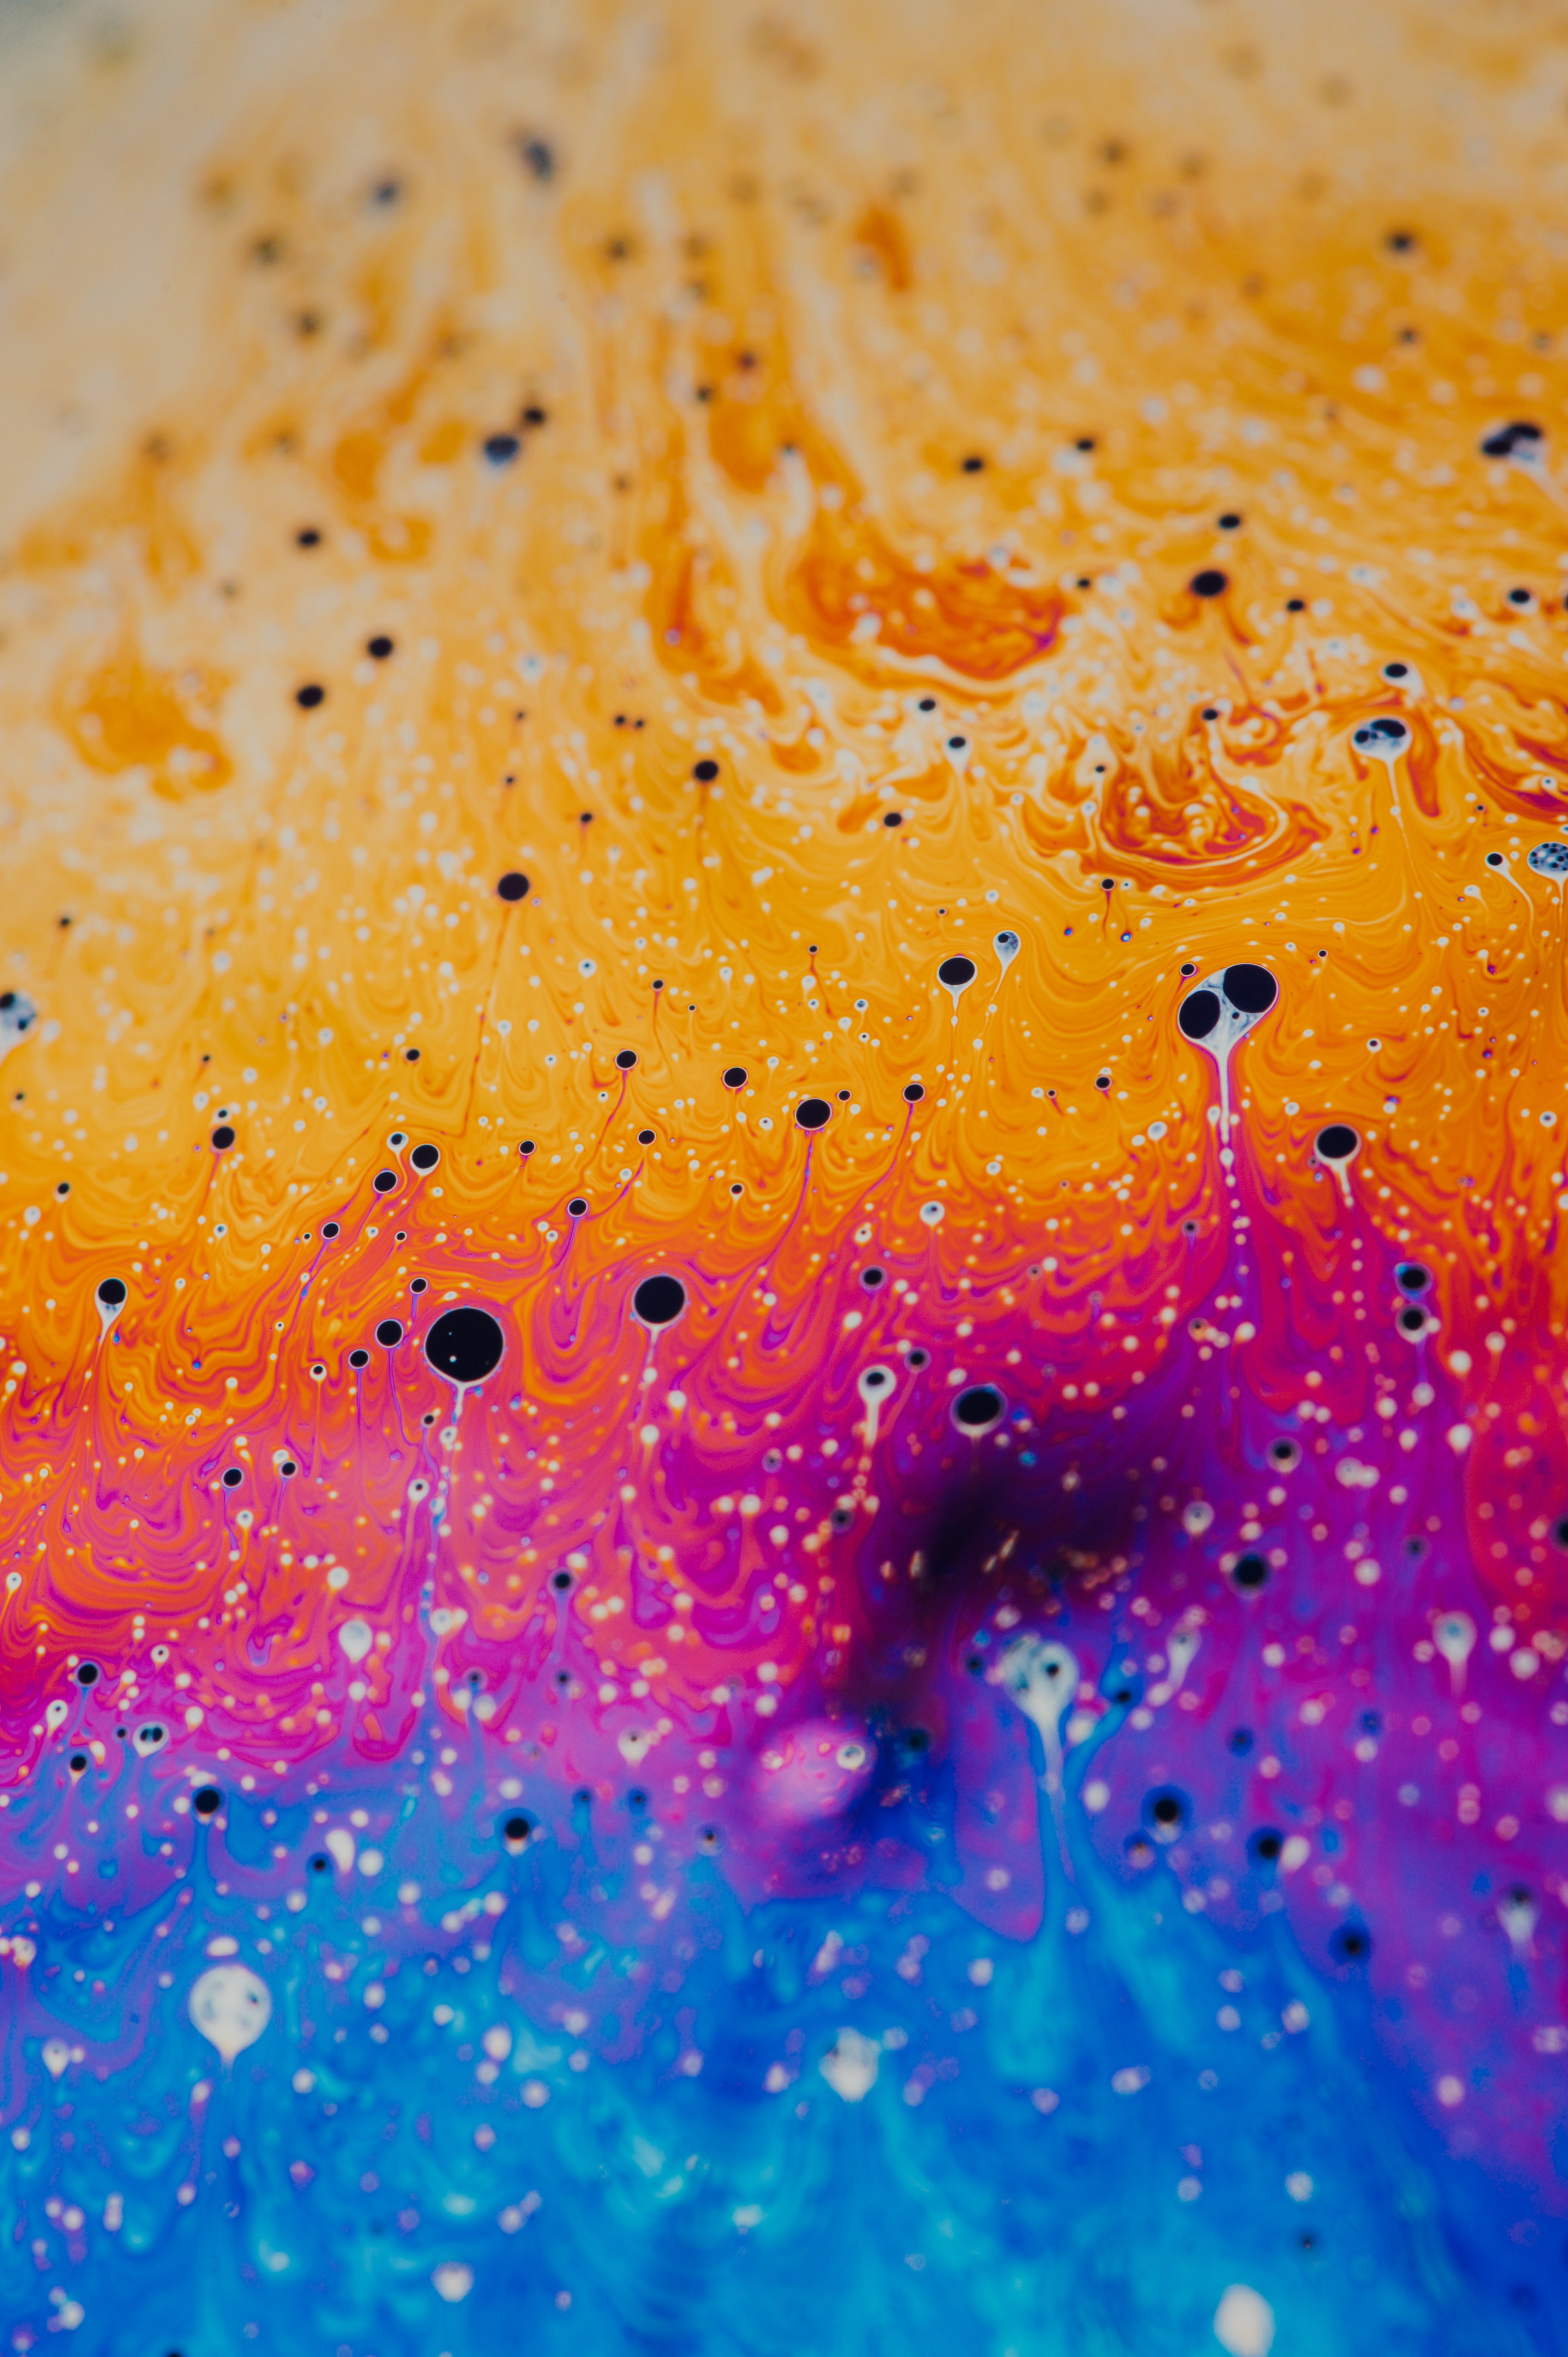 stains, multicolored, abstract, motley, paint, liquid, spots